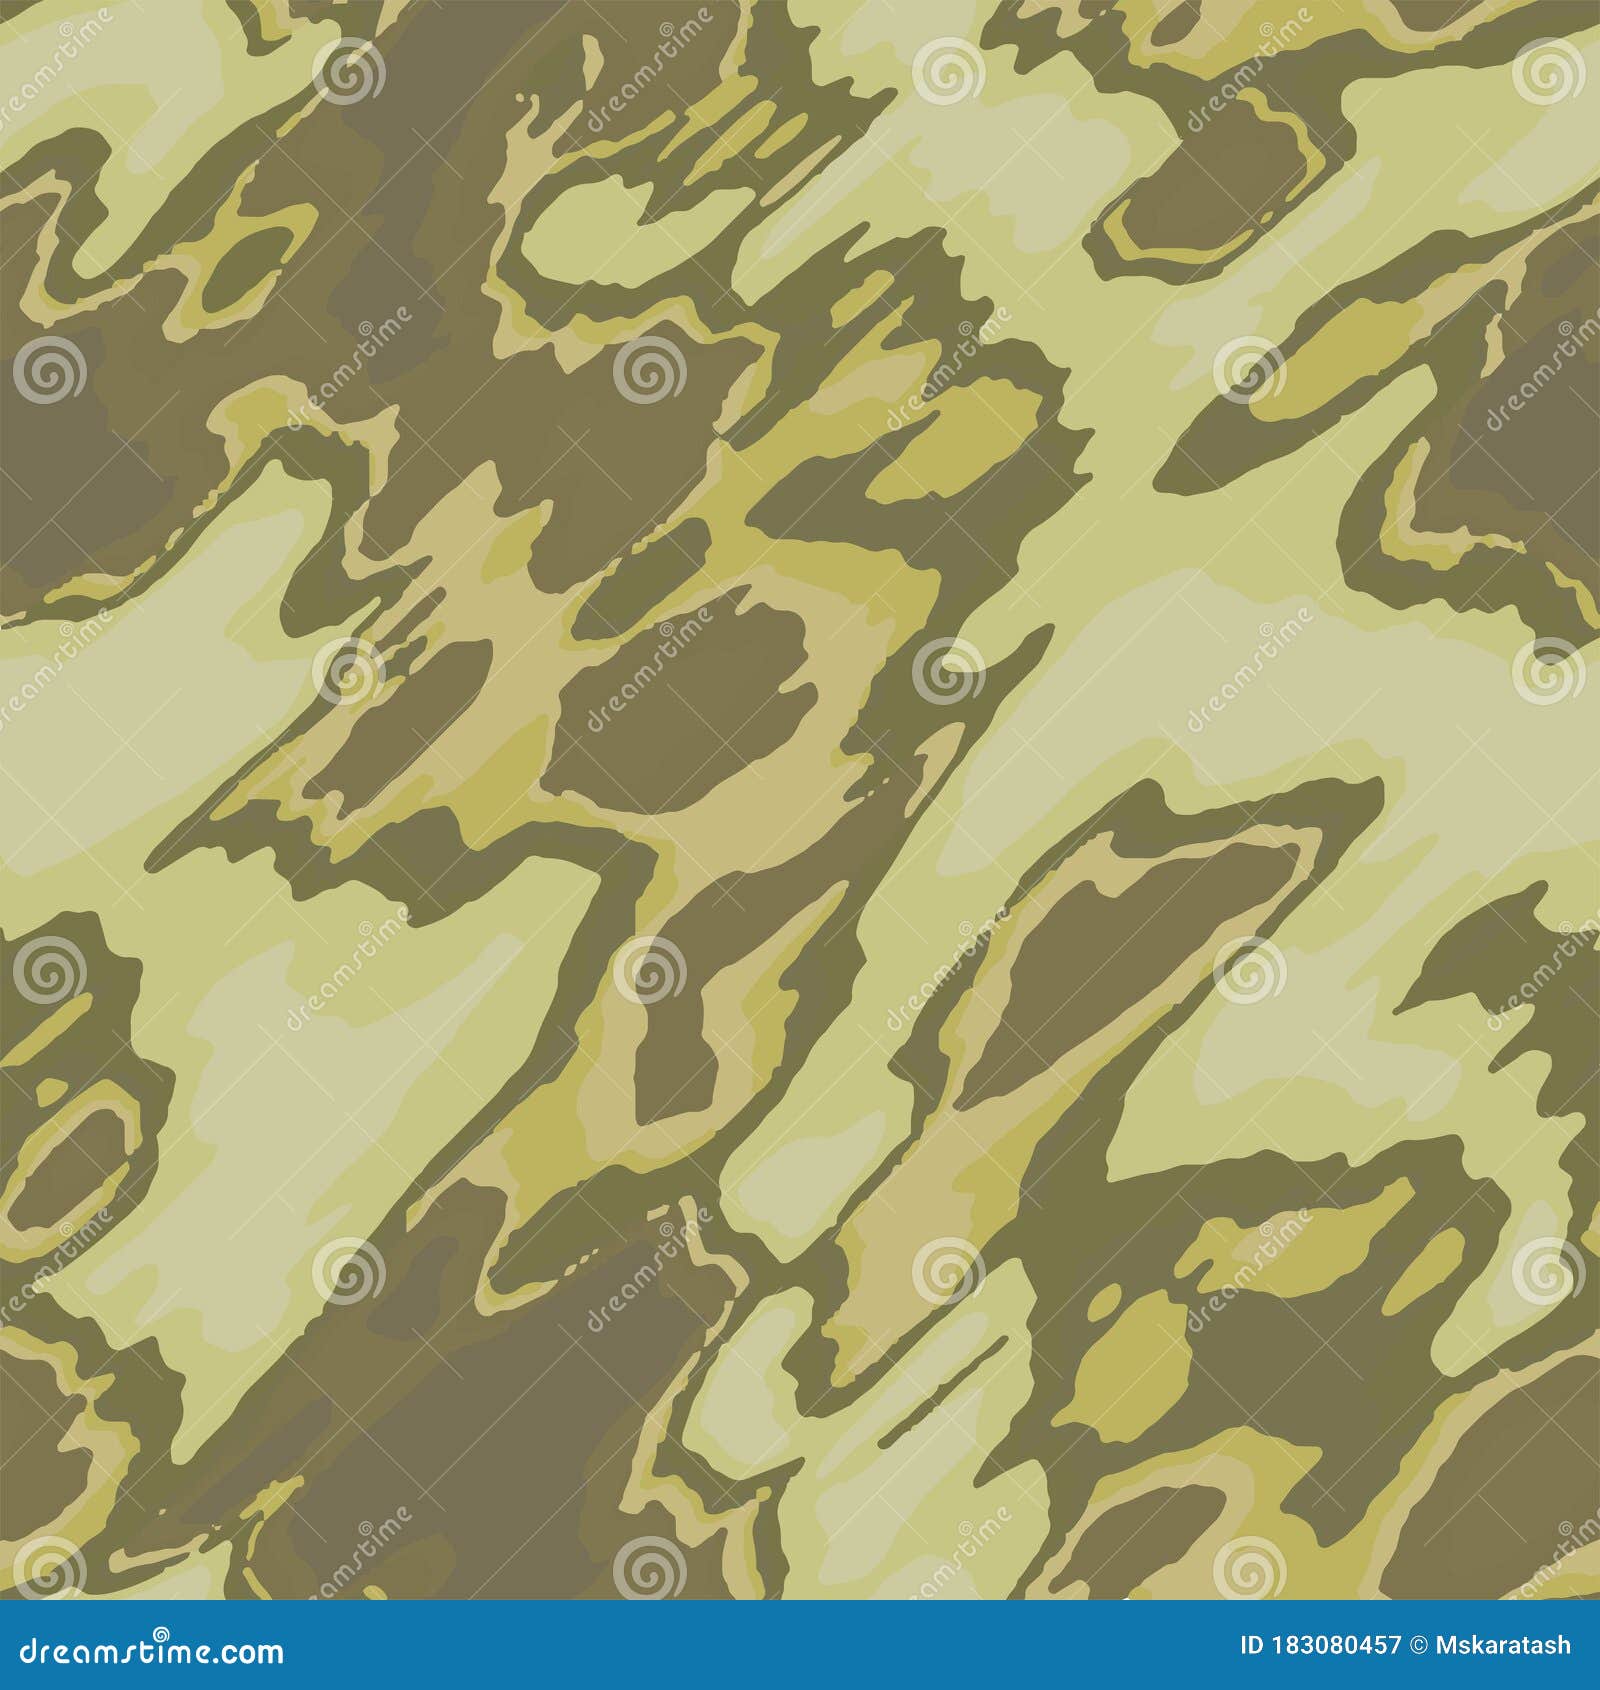 Full Seamless Abstract Multicolor Camouflage Skin Pattern Vector. Stock ...